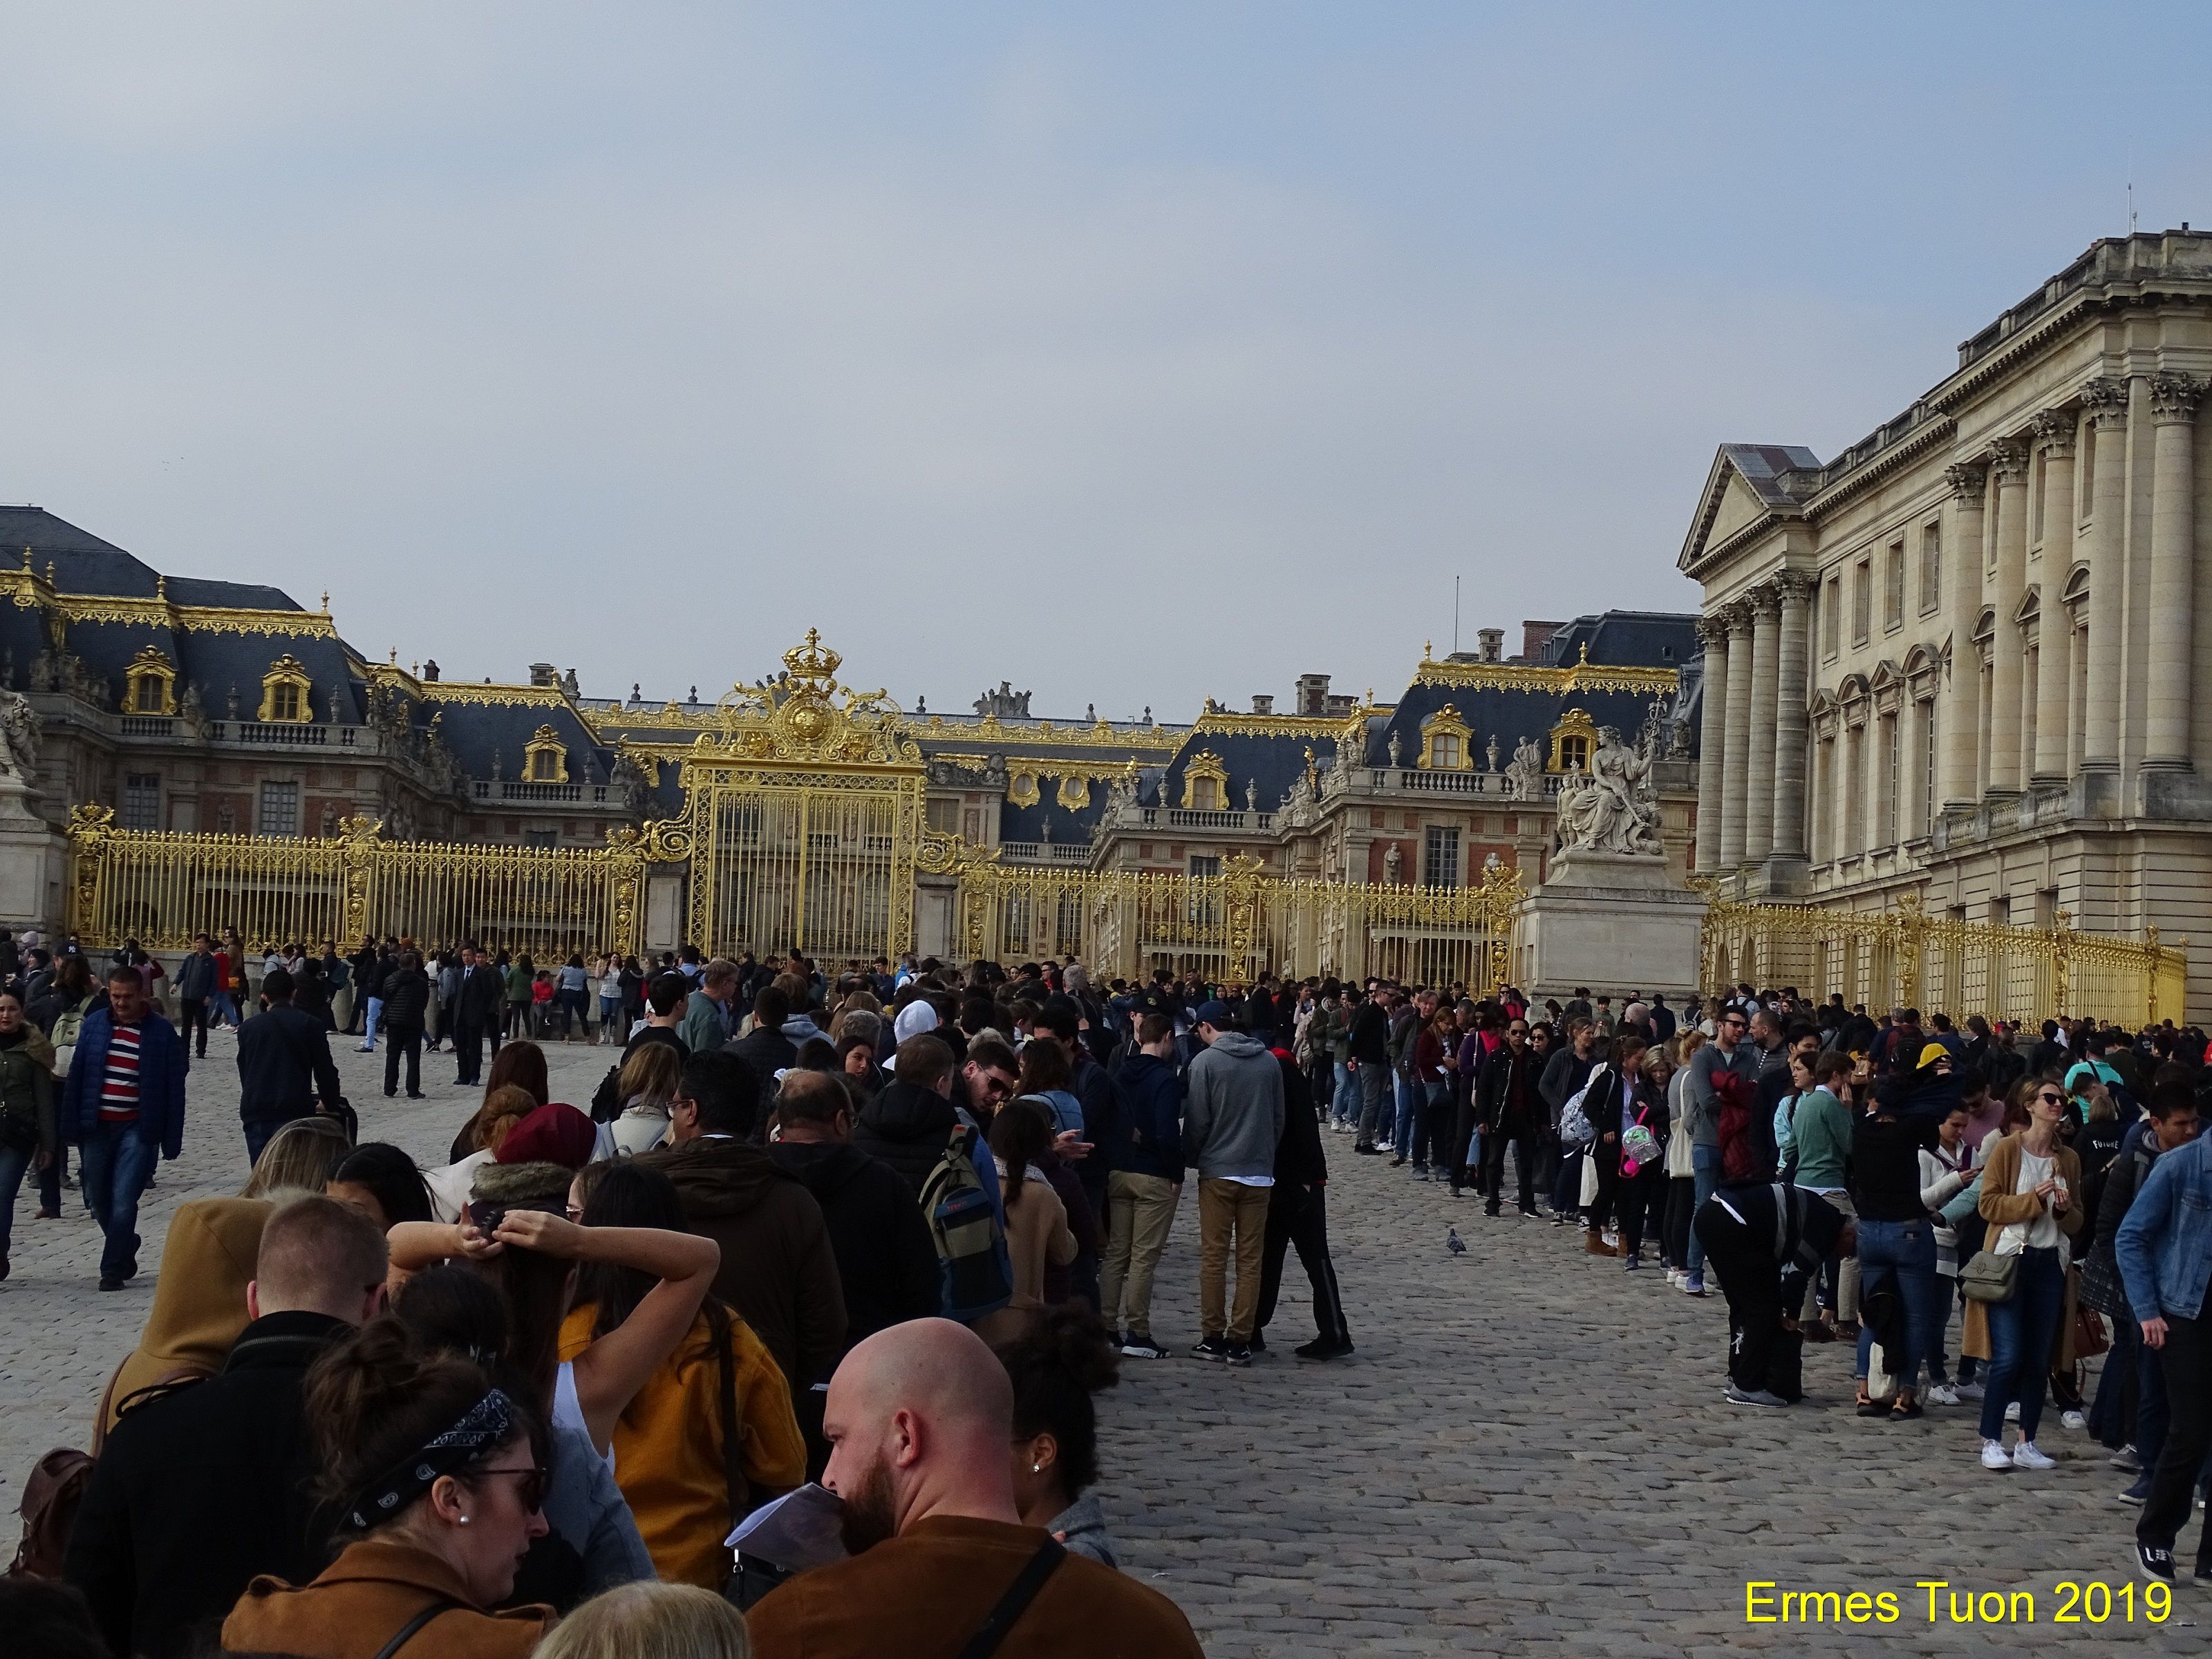 Caption: The long queue for entering the Palave - Photo credit: Local Guide @ermest